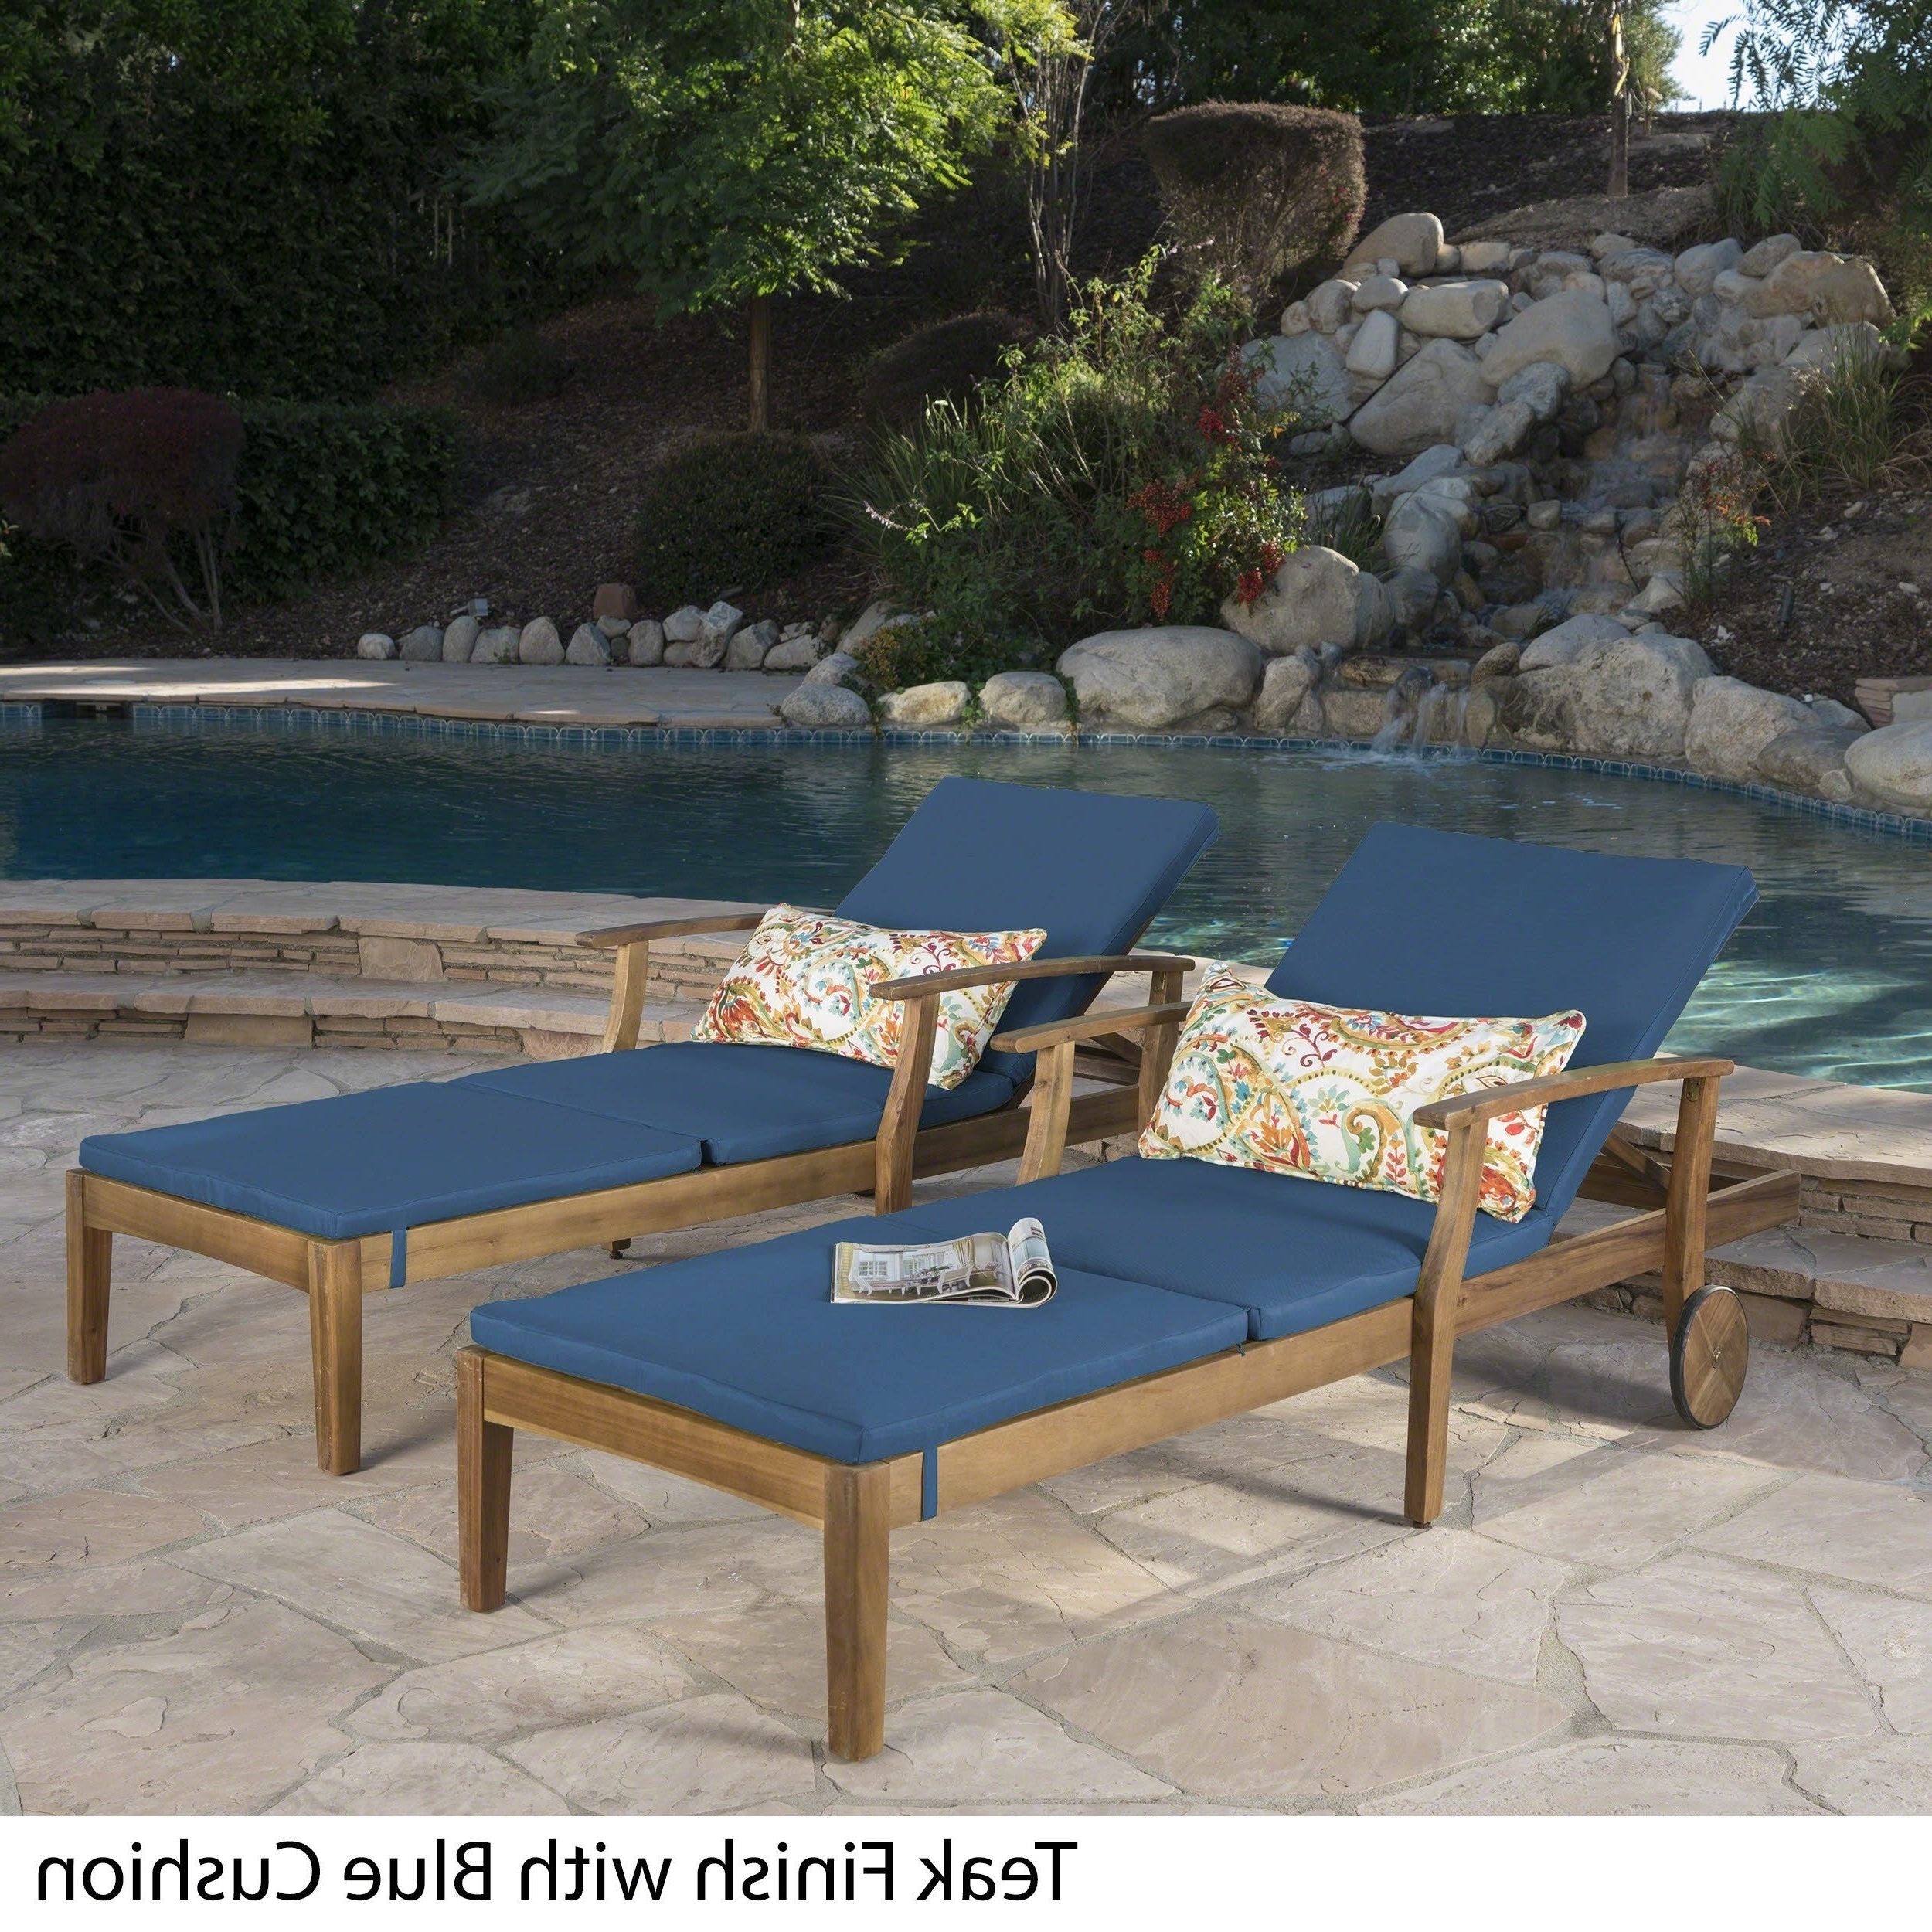 Perla Outdoor Acacia Wood Chaise Lounge With Cushion Inside Recent Perla Outdoor Acacia Wood Chaise Lounge With Cushion (set Of 2) Christopher Knight Home (View 6 of 25)